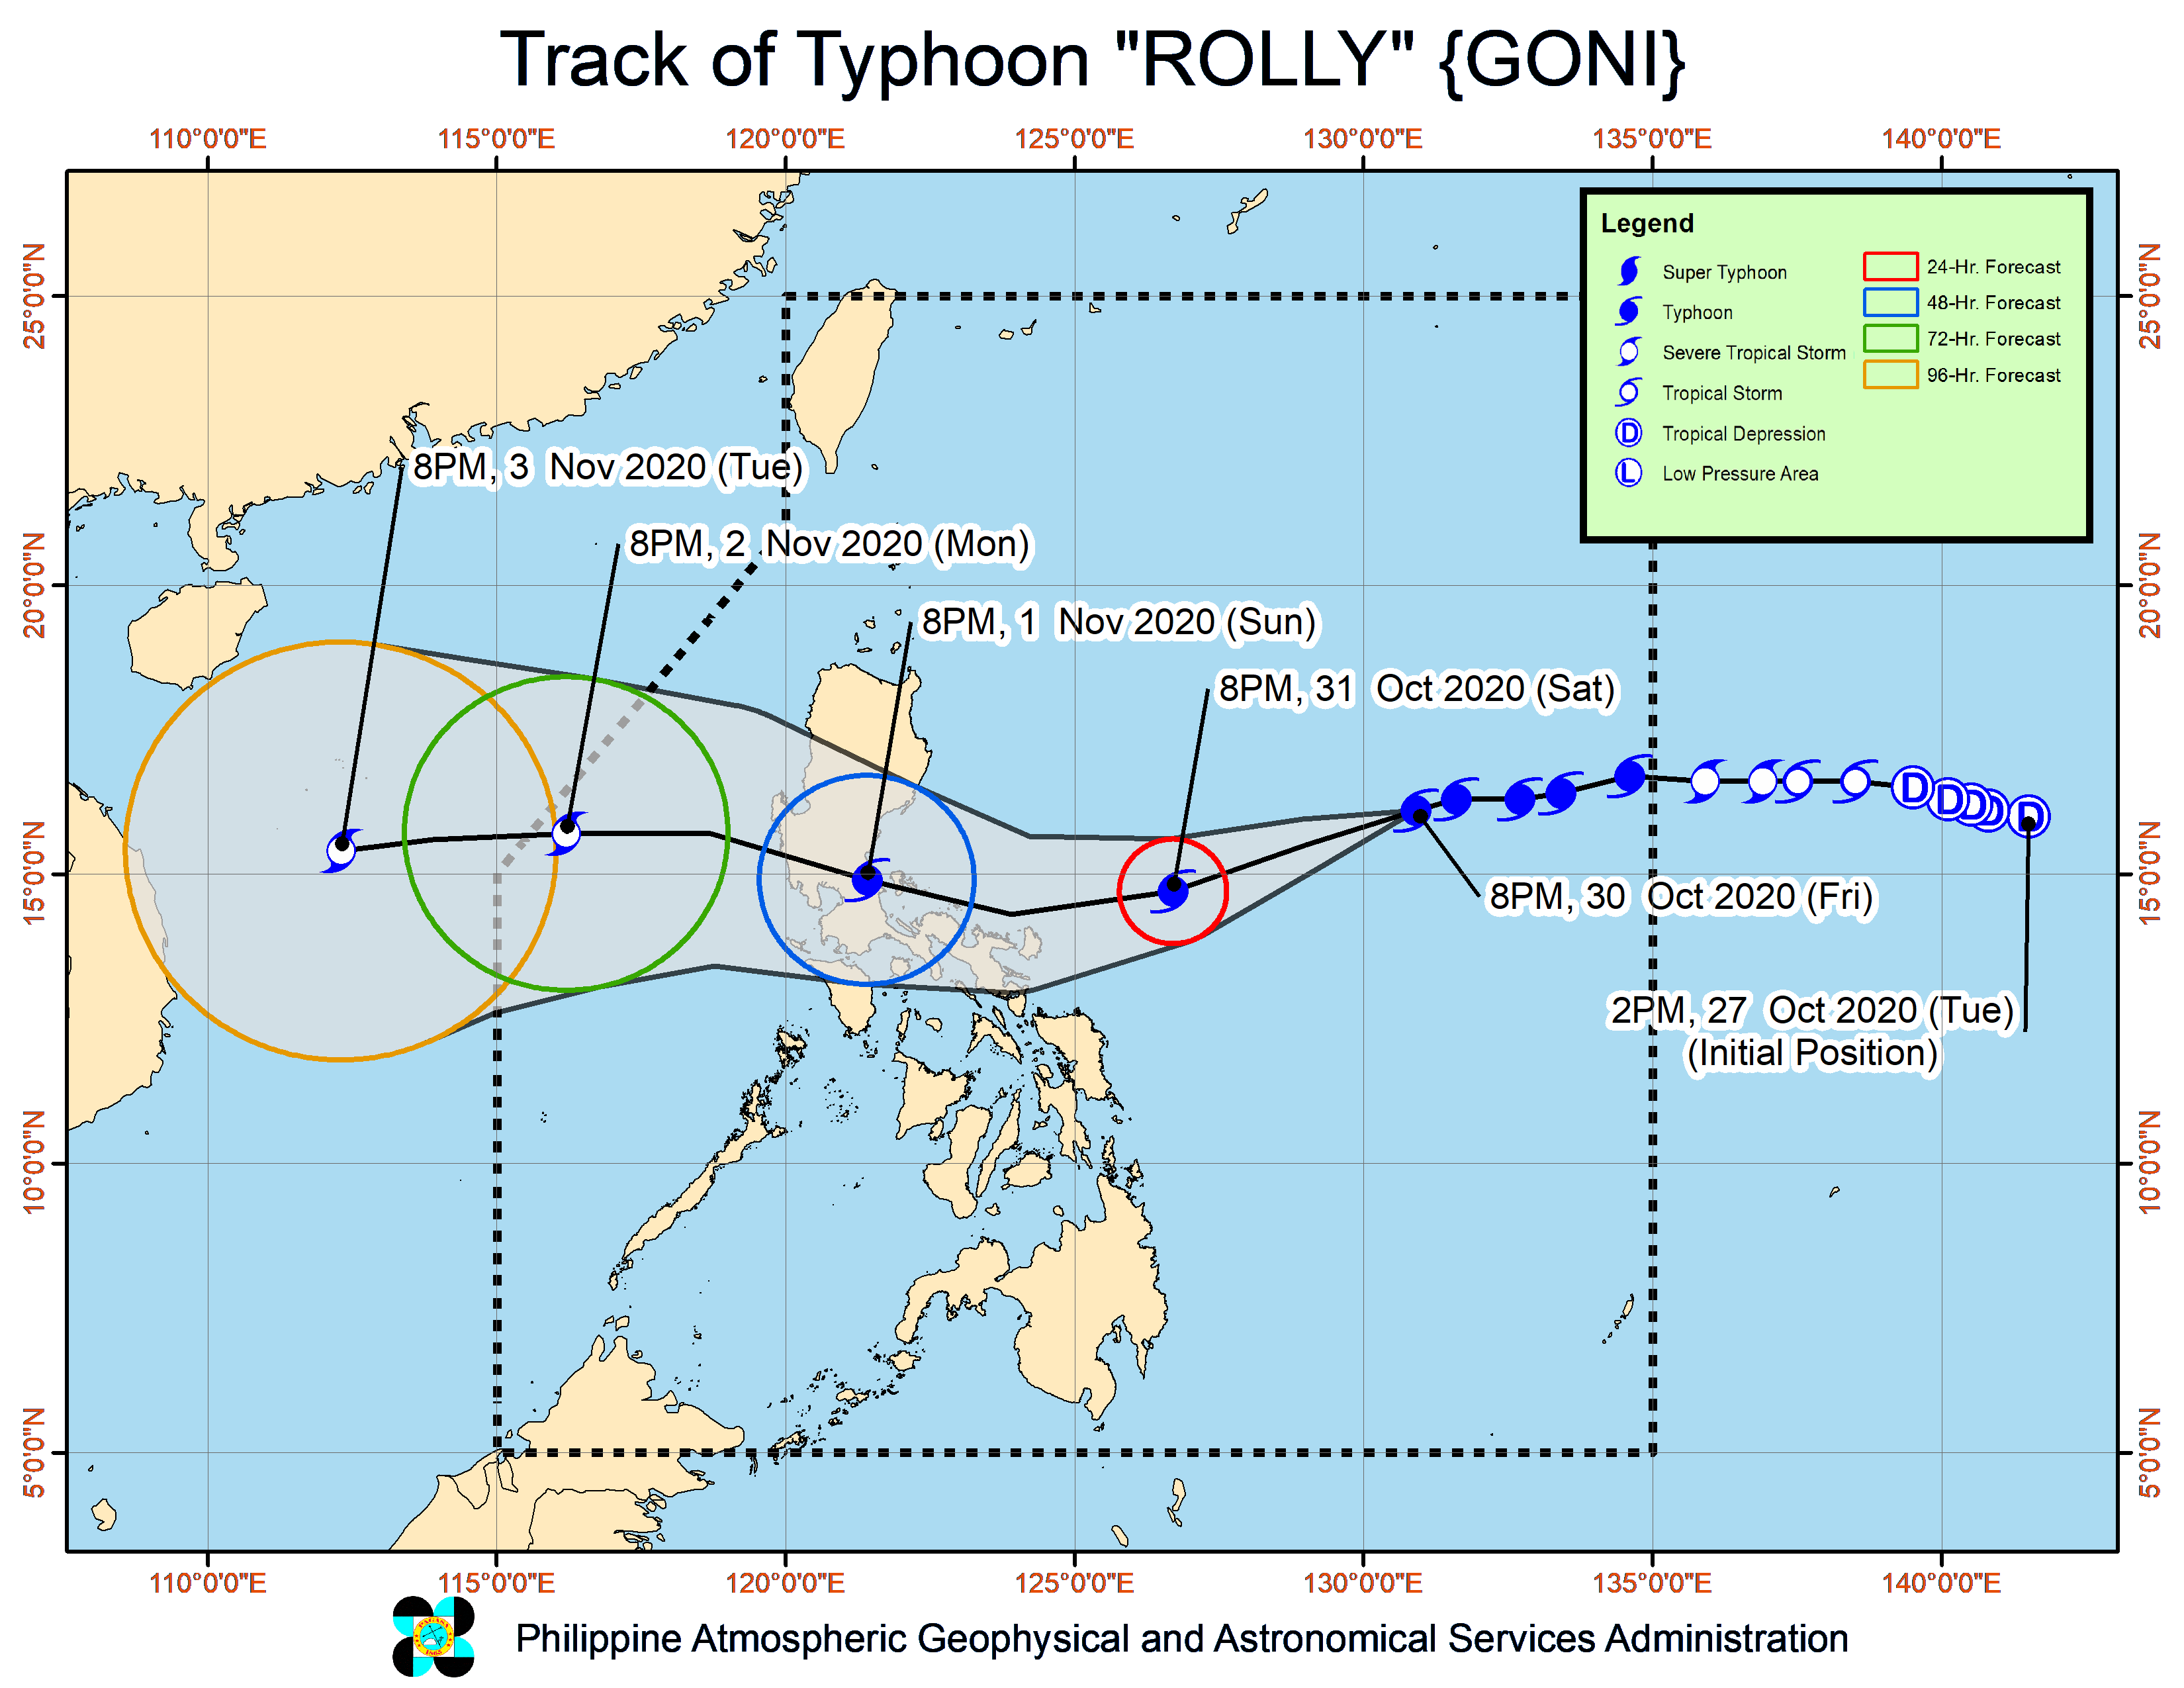 typhoon rolly track 11:30 PM oct 30